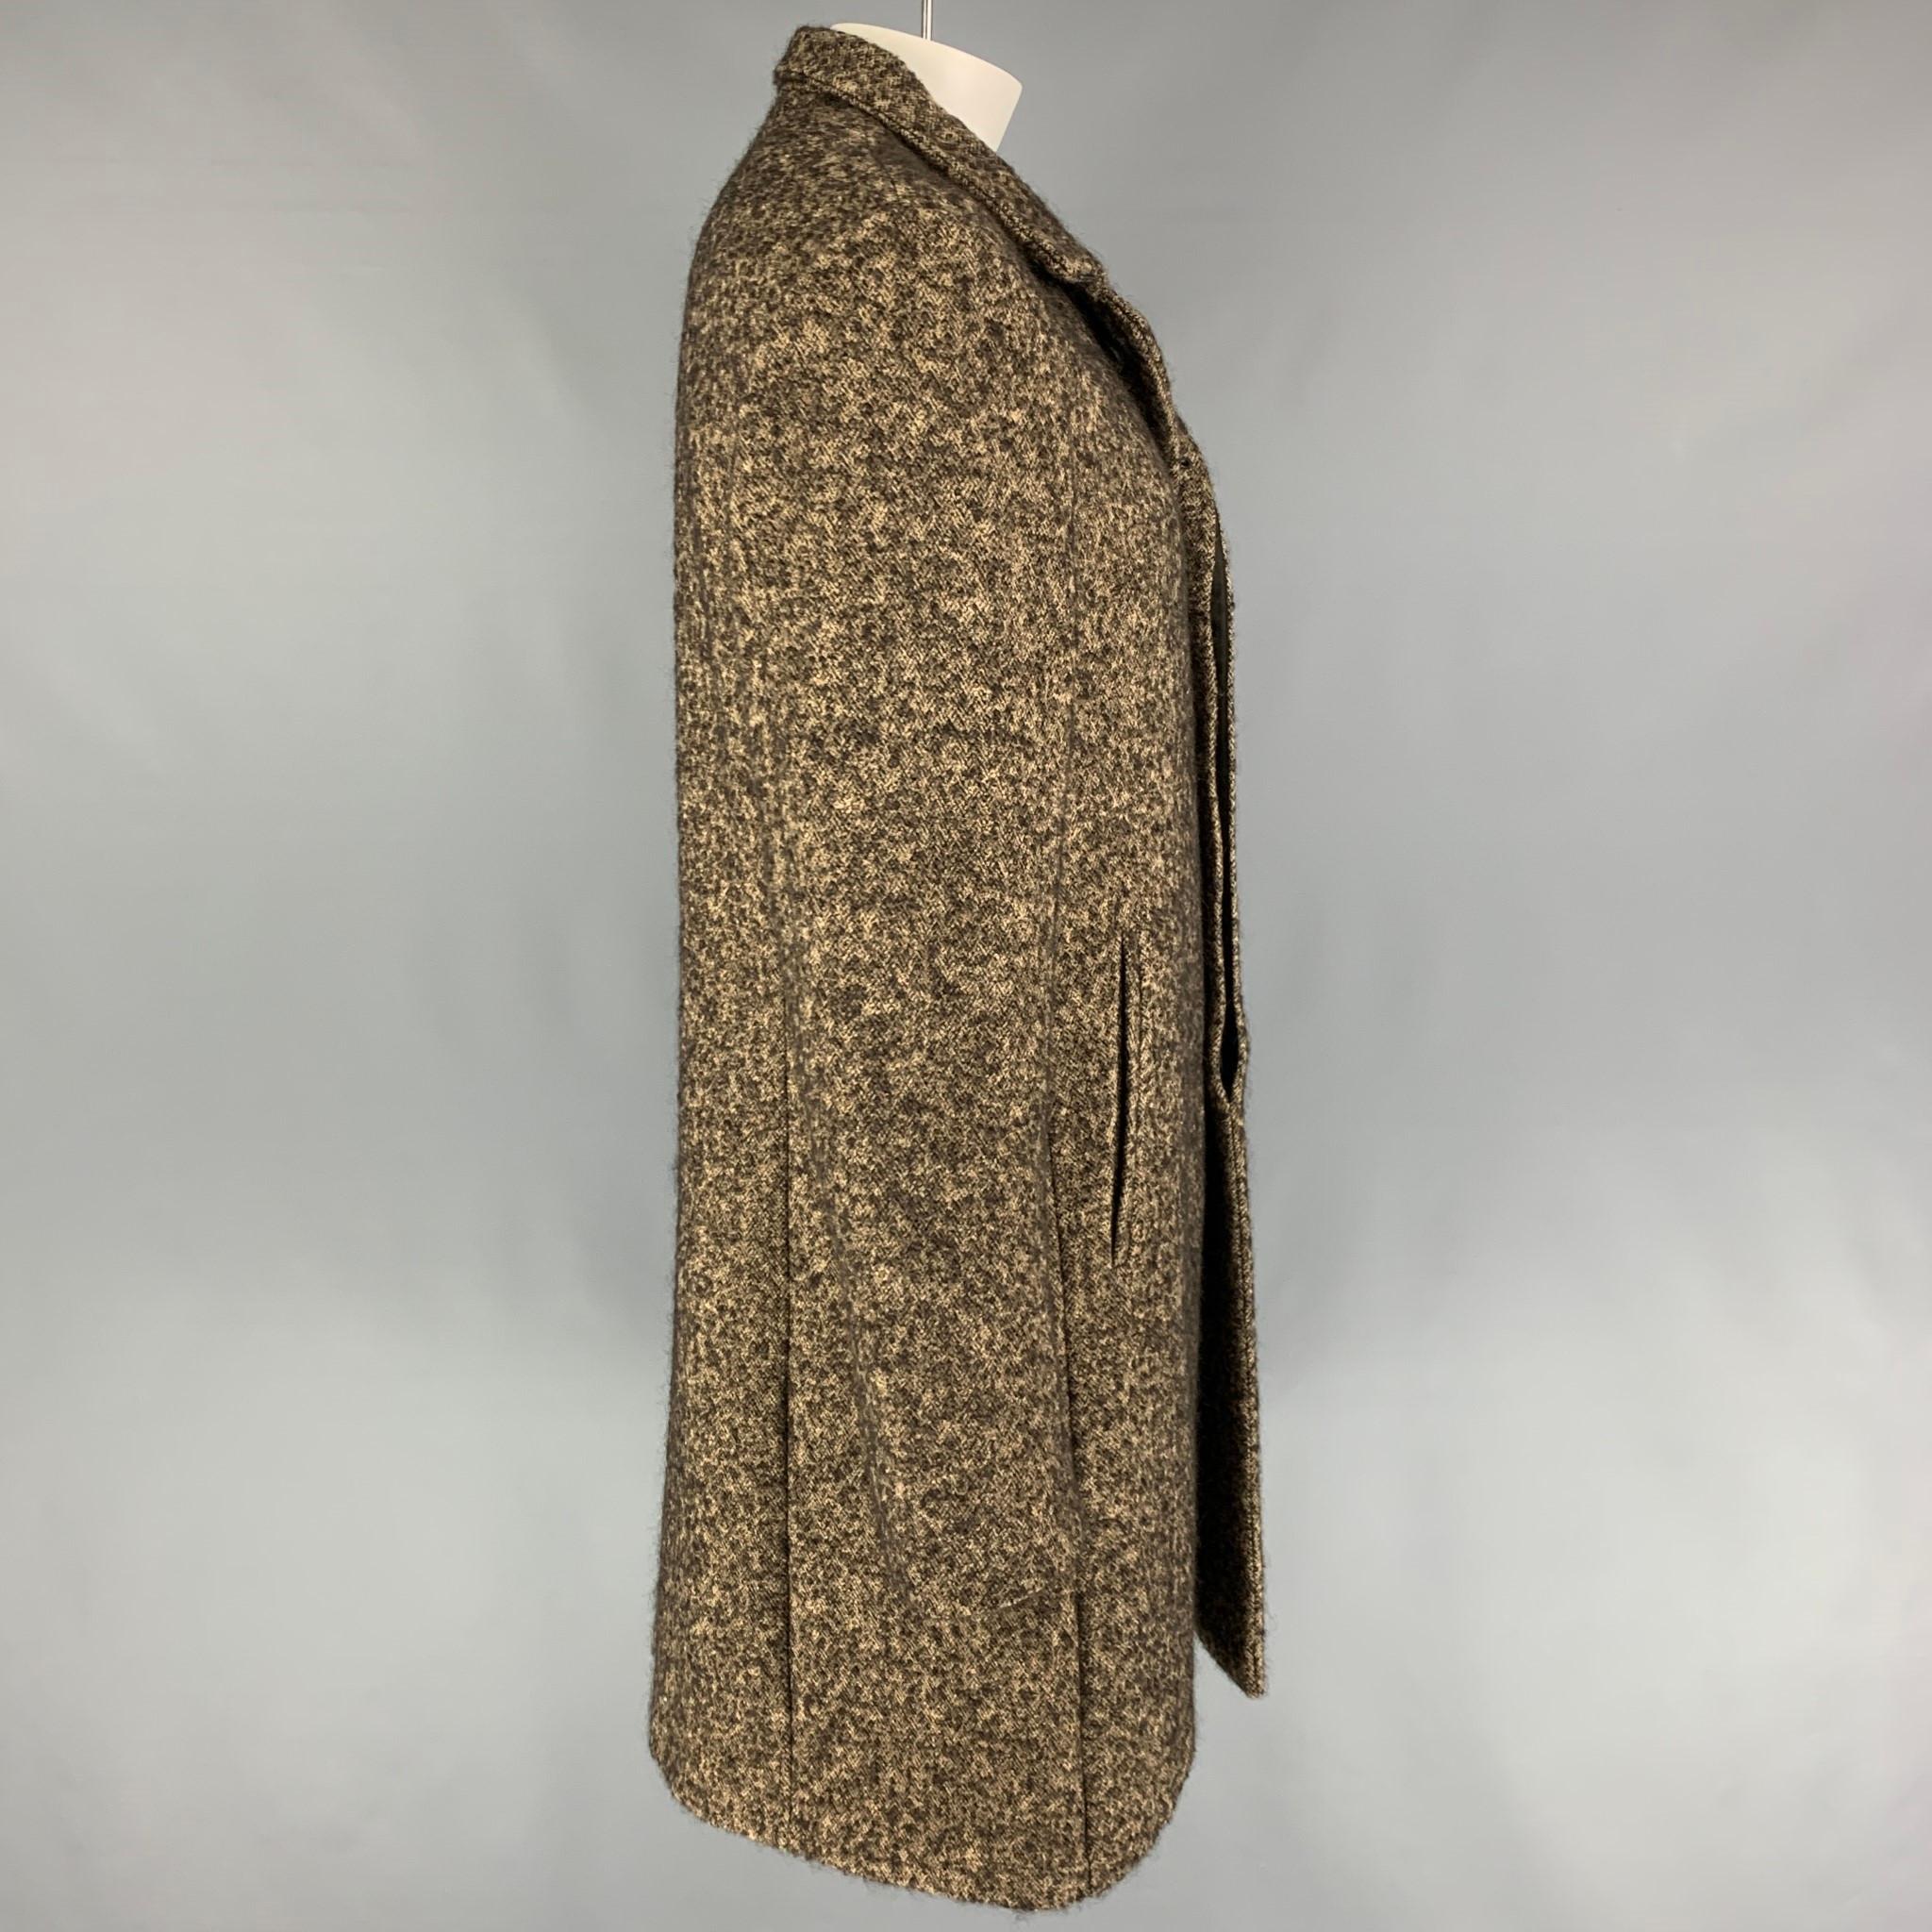 JOHN VARVATOS coat comes in a ta & brown heather wool blend featuring a spread collar, slit pockets, single back vent, and a hidden placket closure. Made in Italy. 

Very Good Pre-Owned Condition.
Marked: 54

Measurements:

Shoulder: 20.5 in.
Chest: